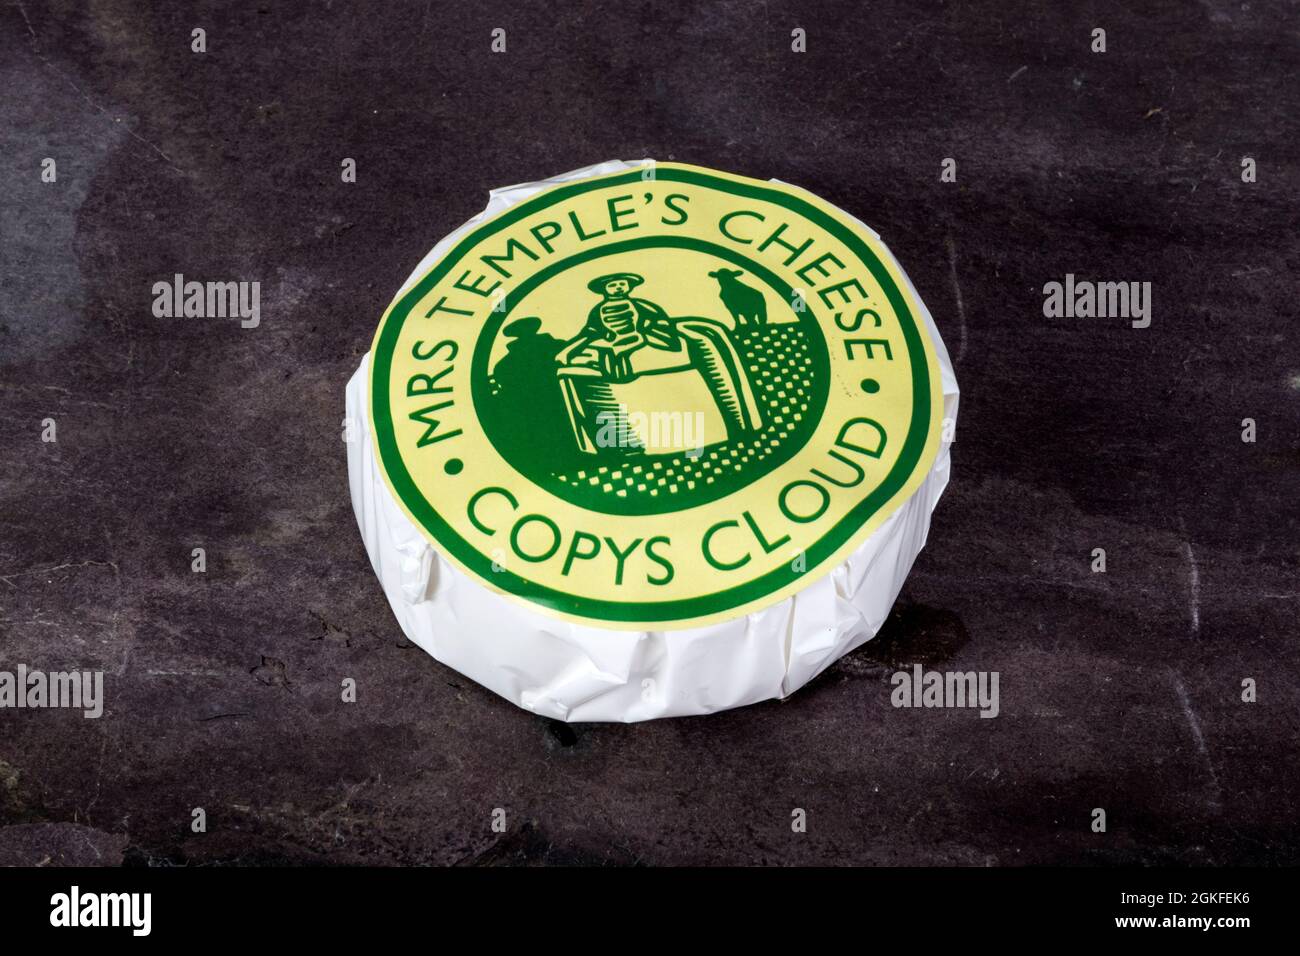 Mrs Temple's Copys Cloud cheese from Copy's Green Farm in Wighton. Stock Photo